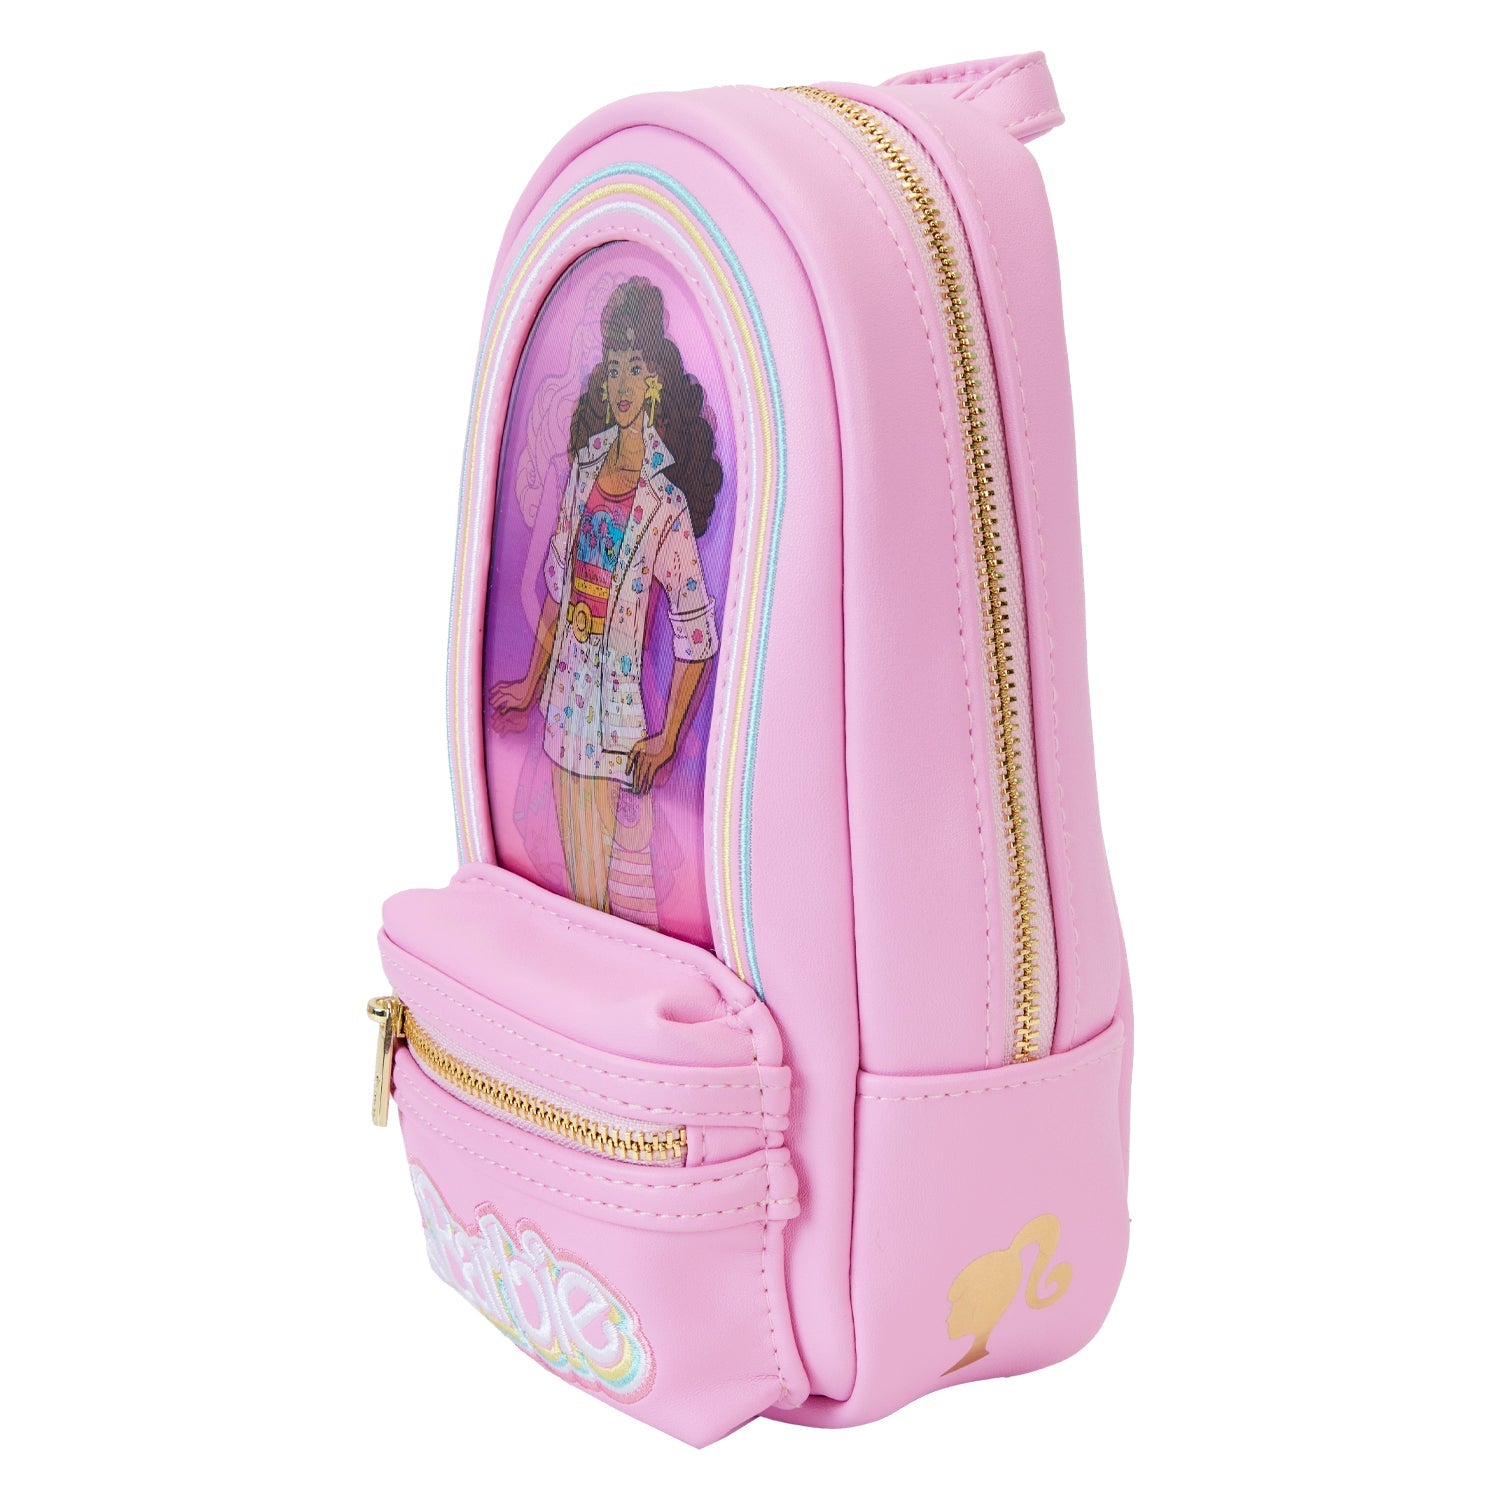 Loungefly x Barbie Mini Backpack Pencil Case - GeekCore